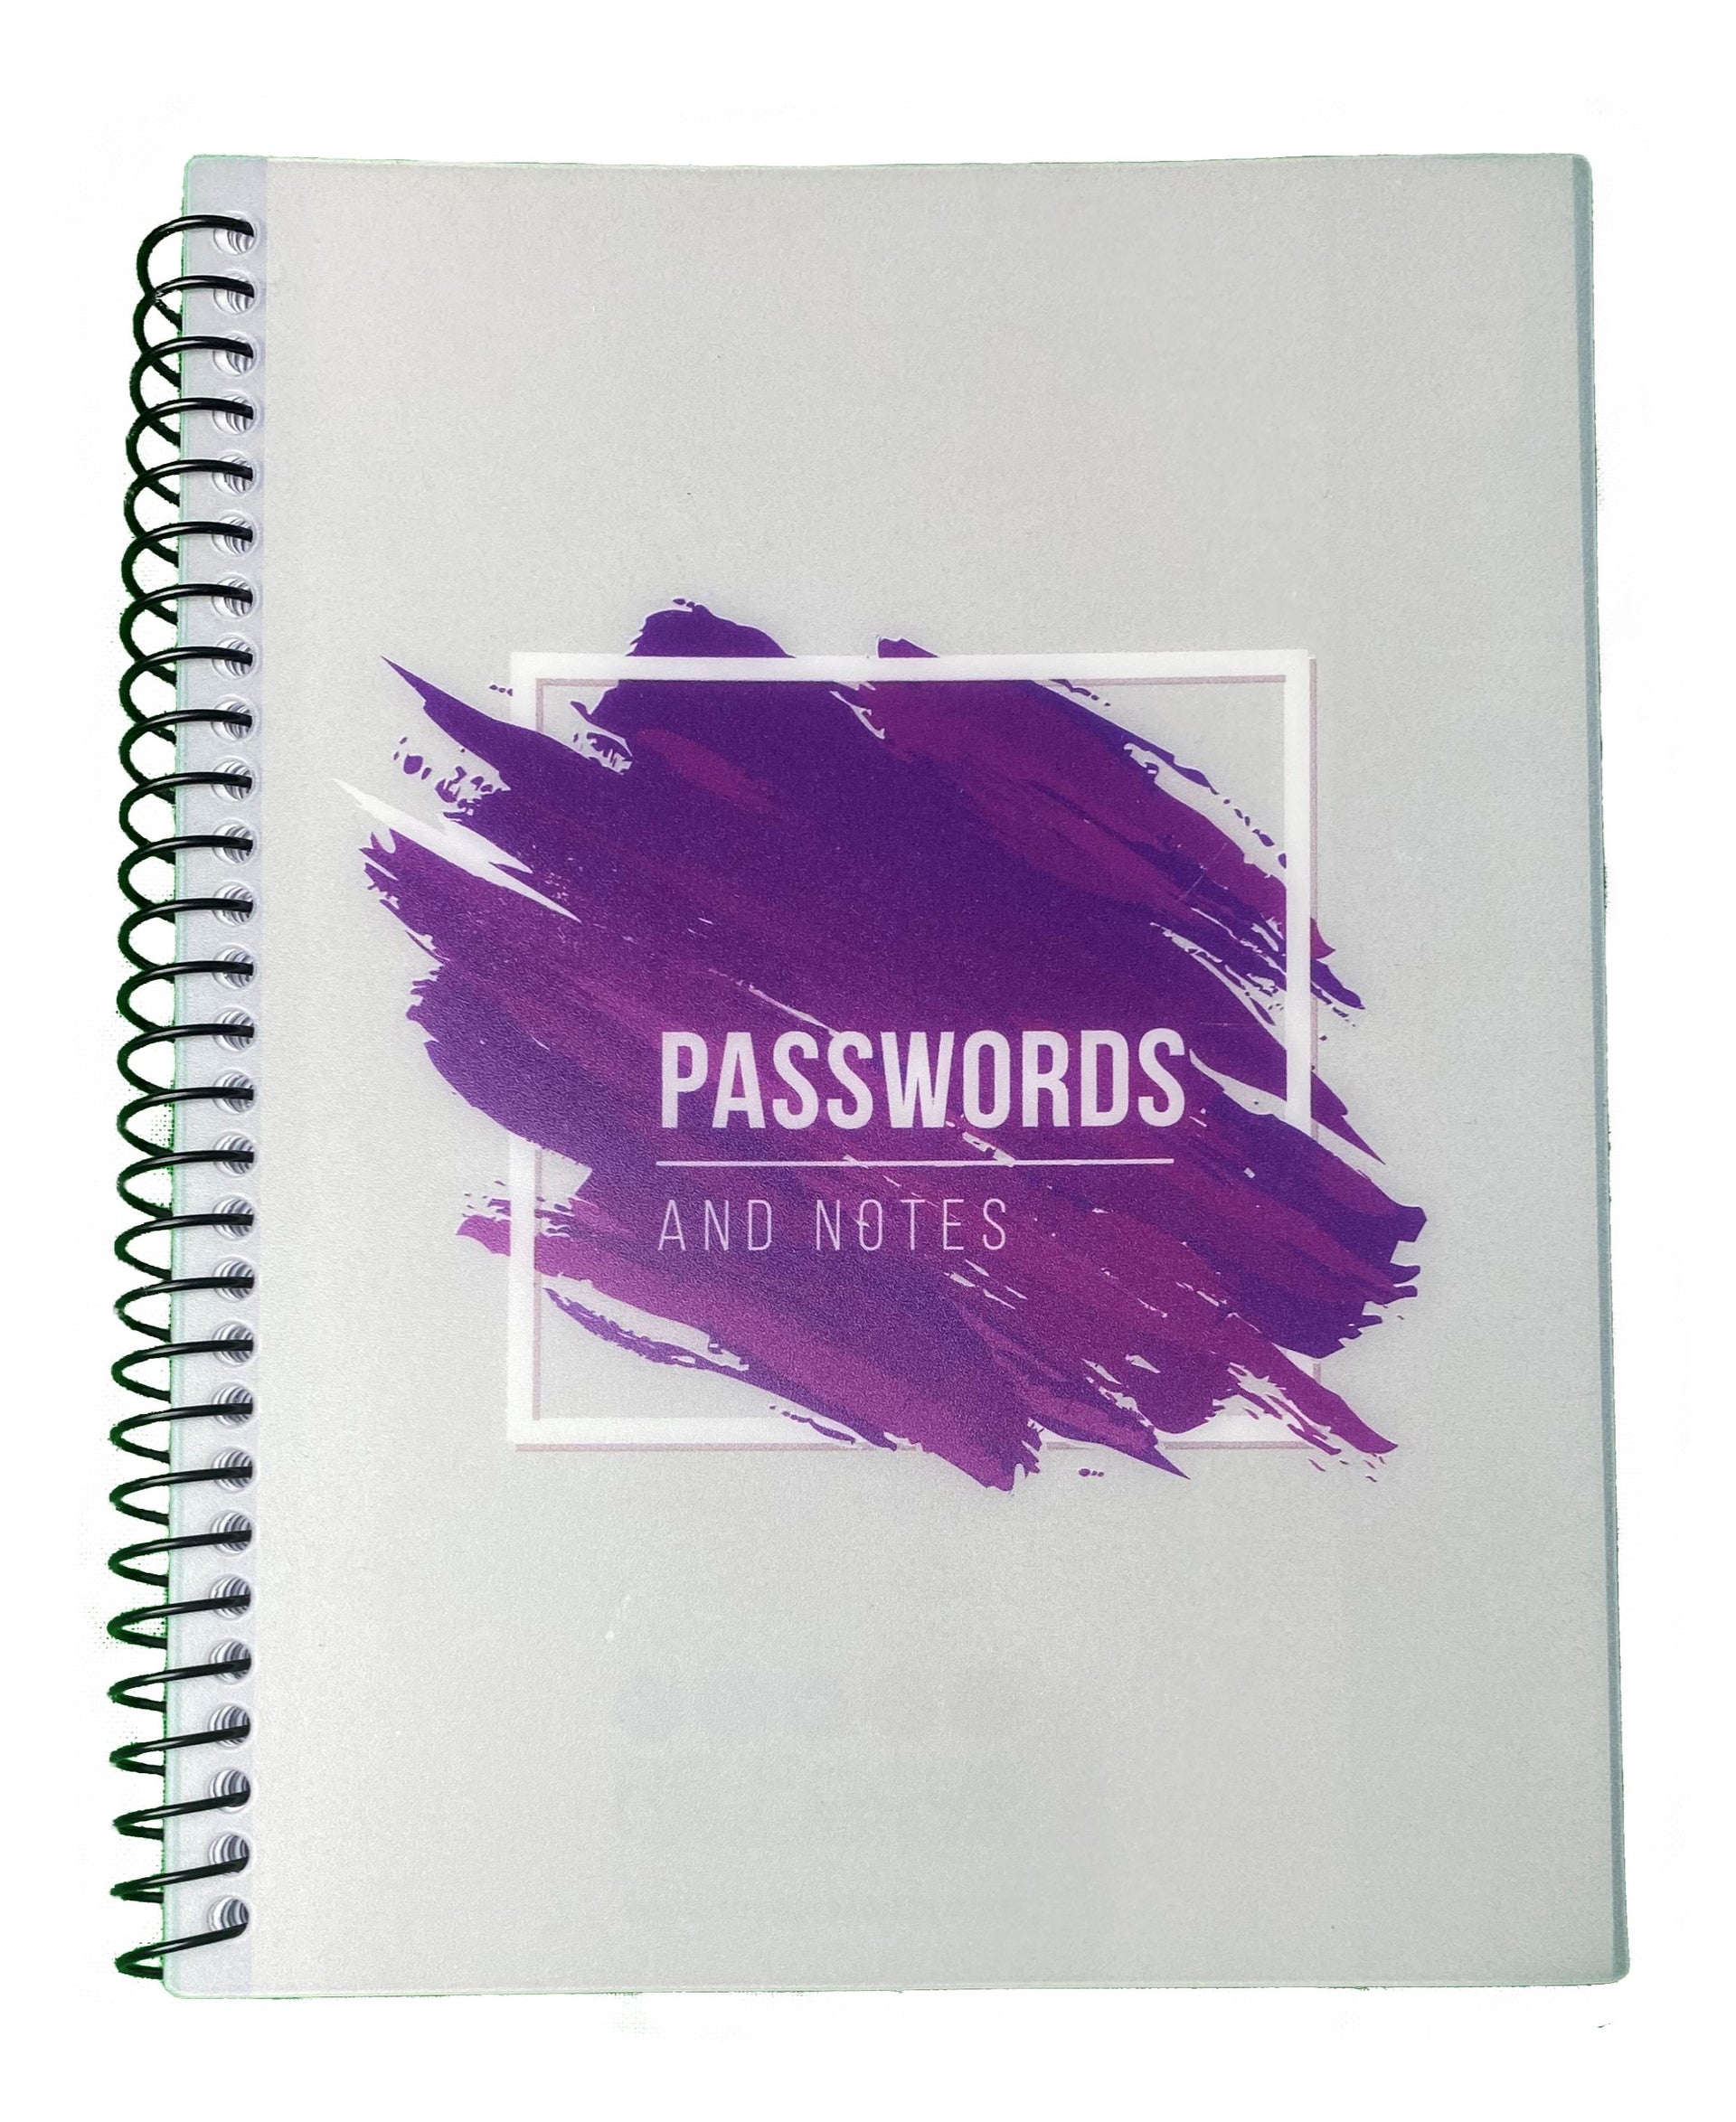 RE-FOCUS THE CREATIVE OFFICE, Small/Mini Password Book, Alphabetical Tabs,  Spiral Binding, Purple